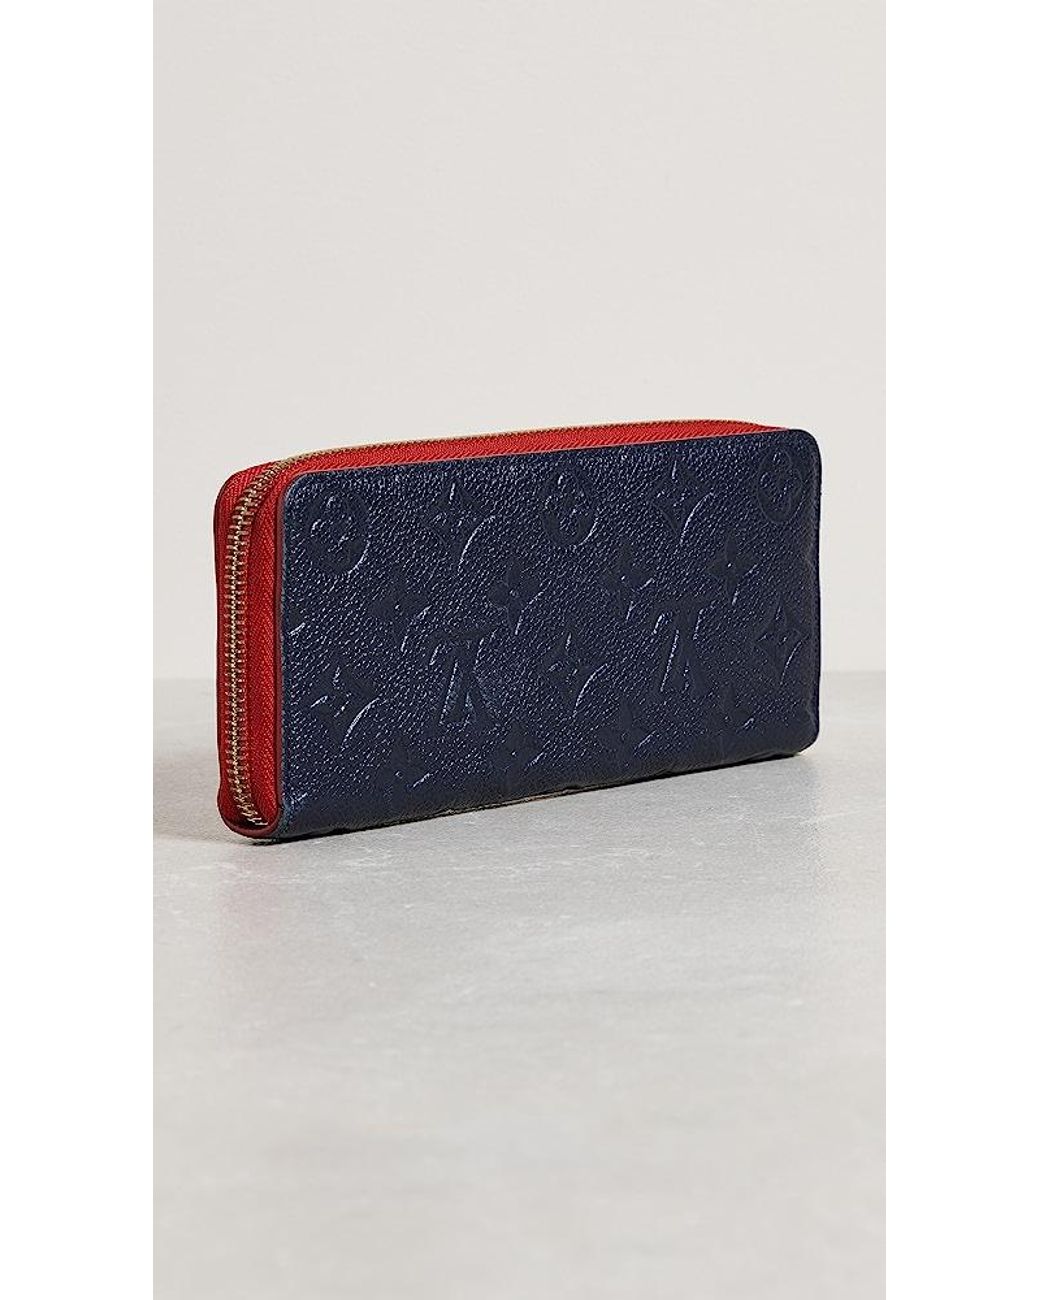 What Goes Around Comes Around Louis Vuitton Flower Clemence Wallet